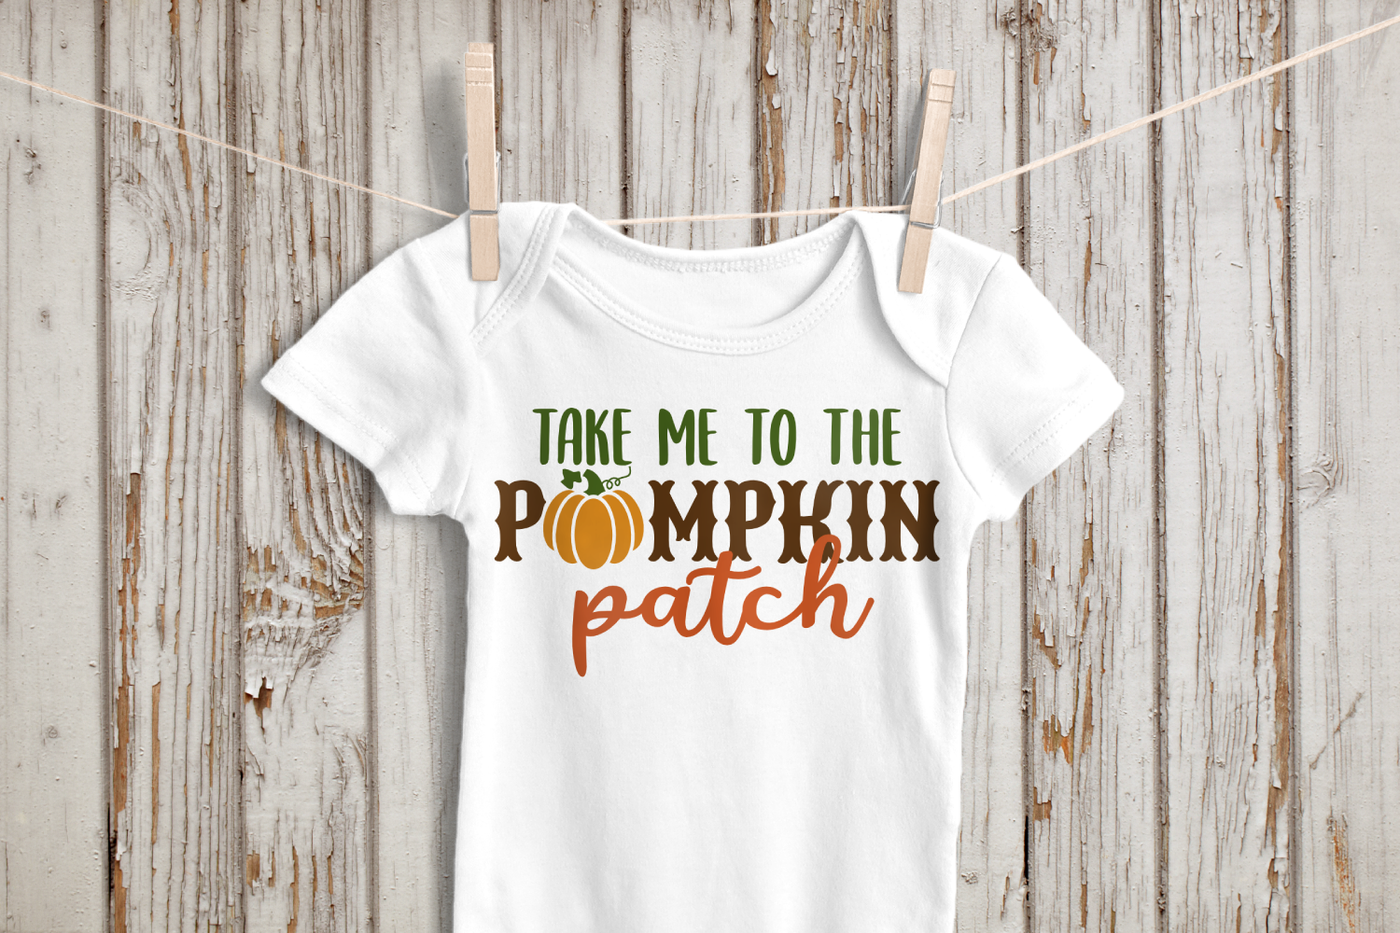 Design that says "take me to the pumpkin patch with a pumpkin in place of the U.